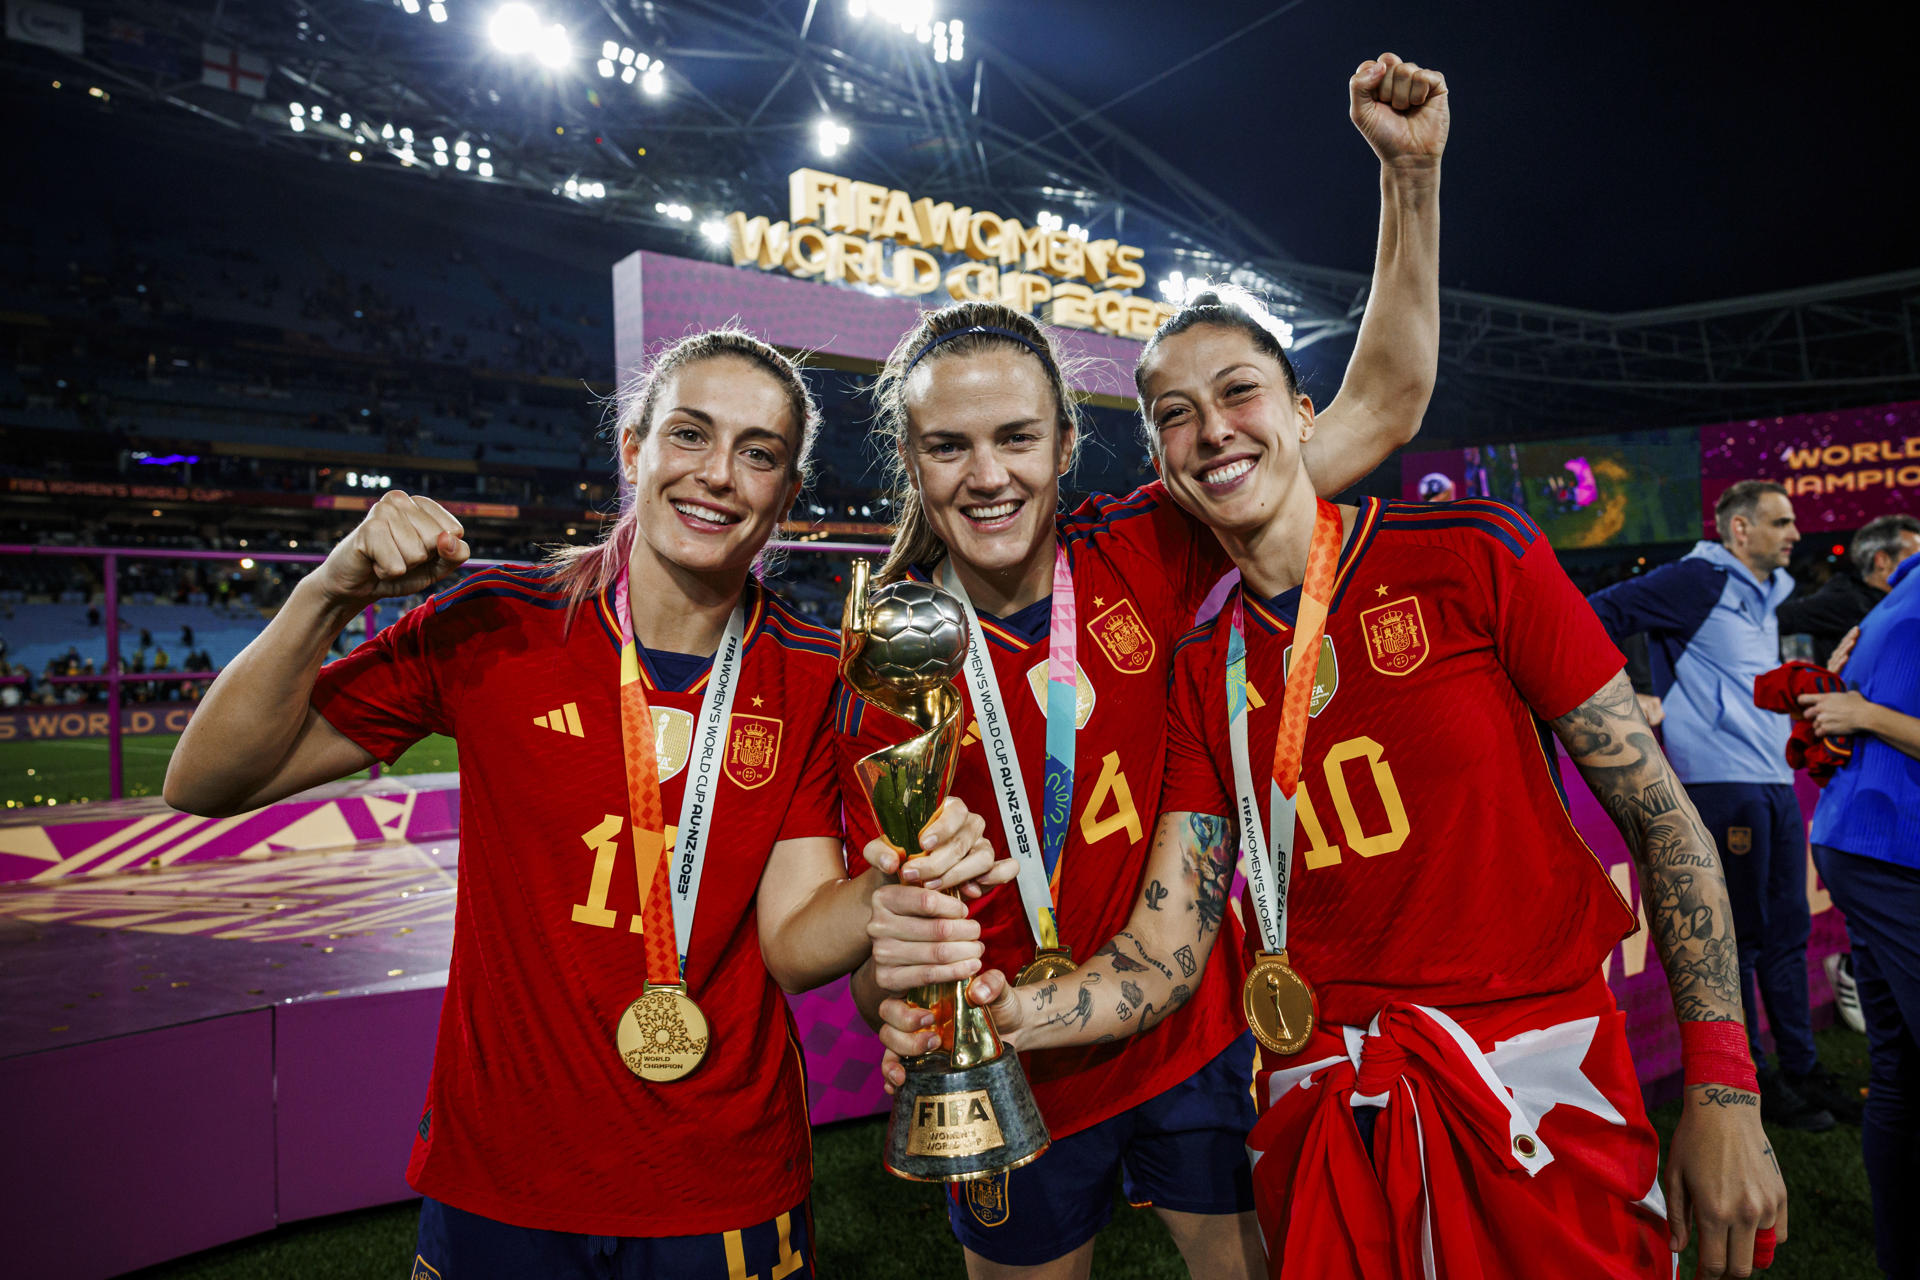 Spanish women's national soccer team players Alexia Putellas (l), Irene Parades (c) and Jenni Hermoso (r) pose with the World Cup trophy after Spain won the Women's World Cup Final between Spain and England in Sydney.EFE/RFEF HANDOUT/Pablo García
